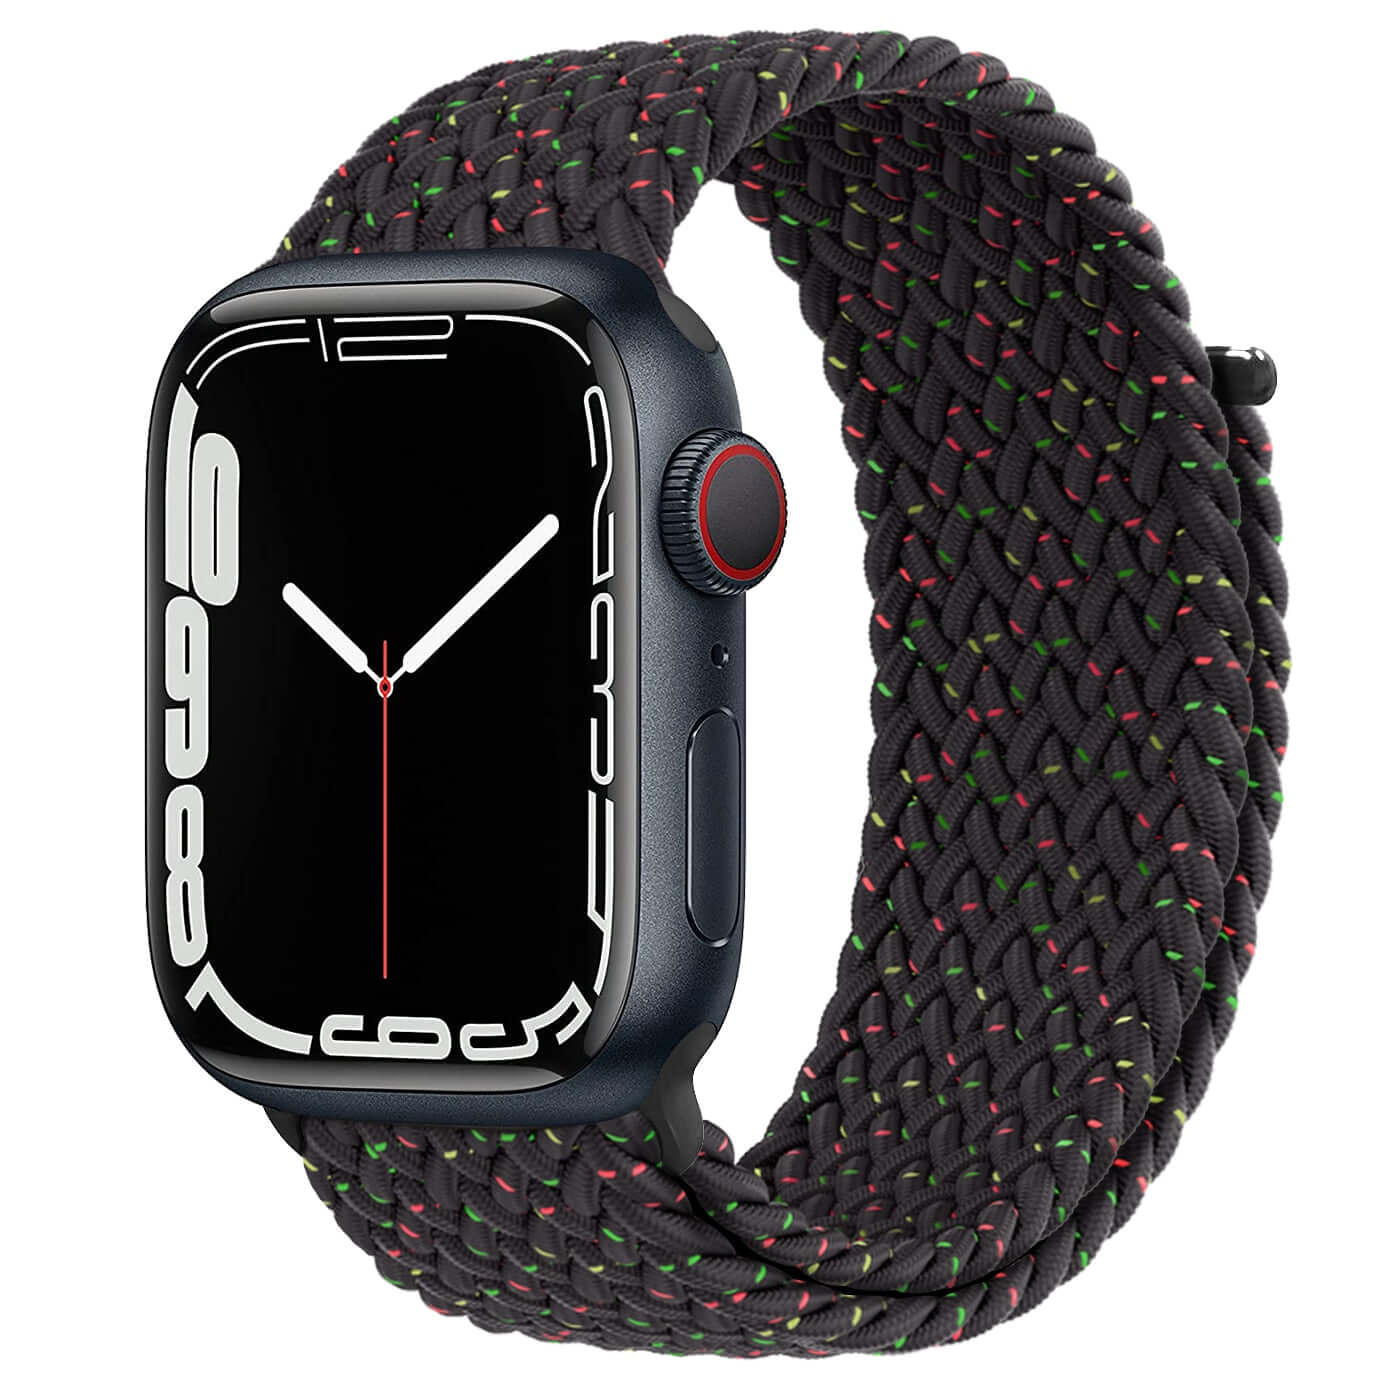 Atphoneshop.com Braided Band Black Unity for Apple Watch 